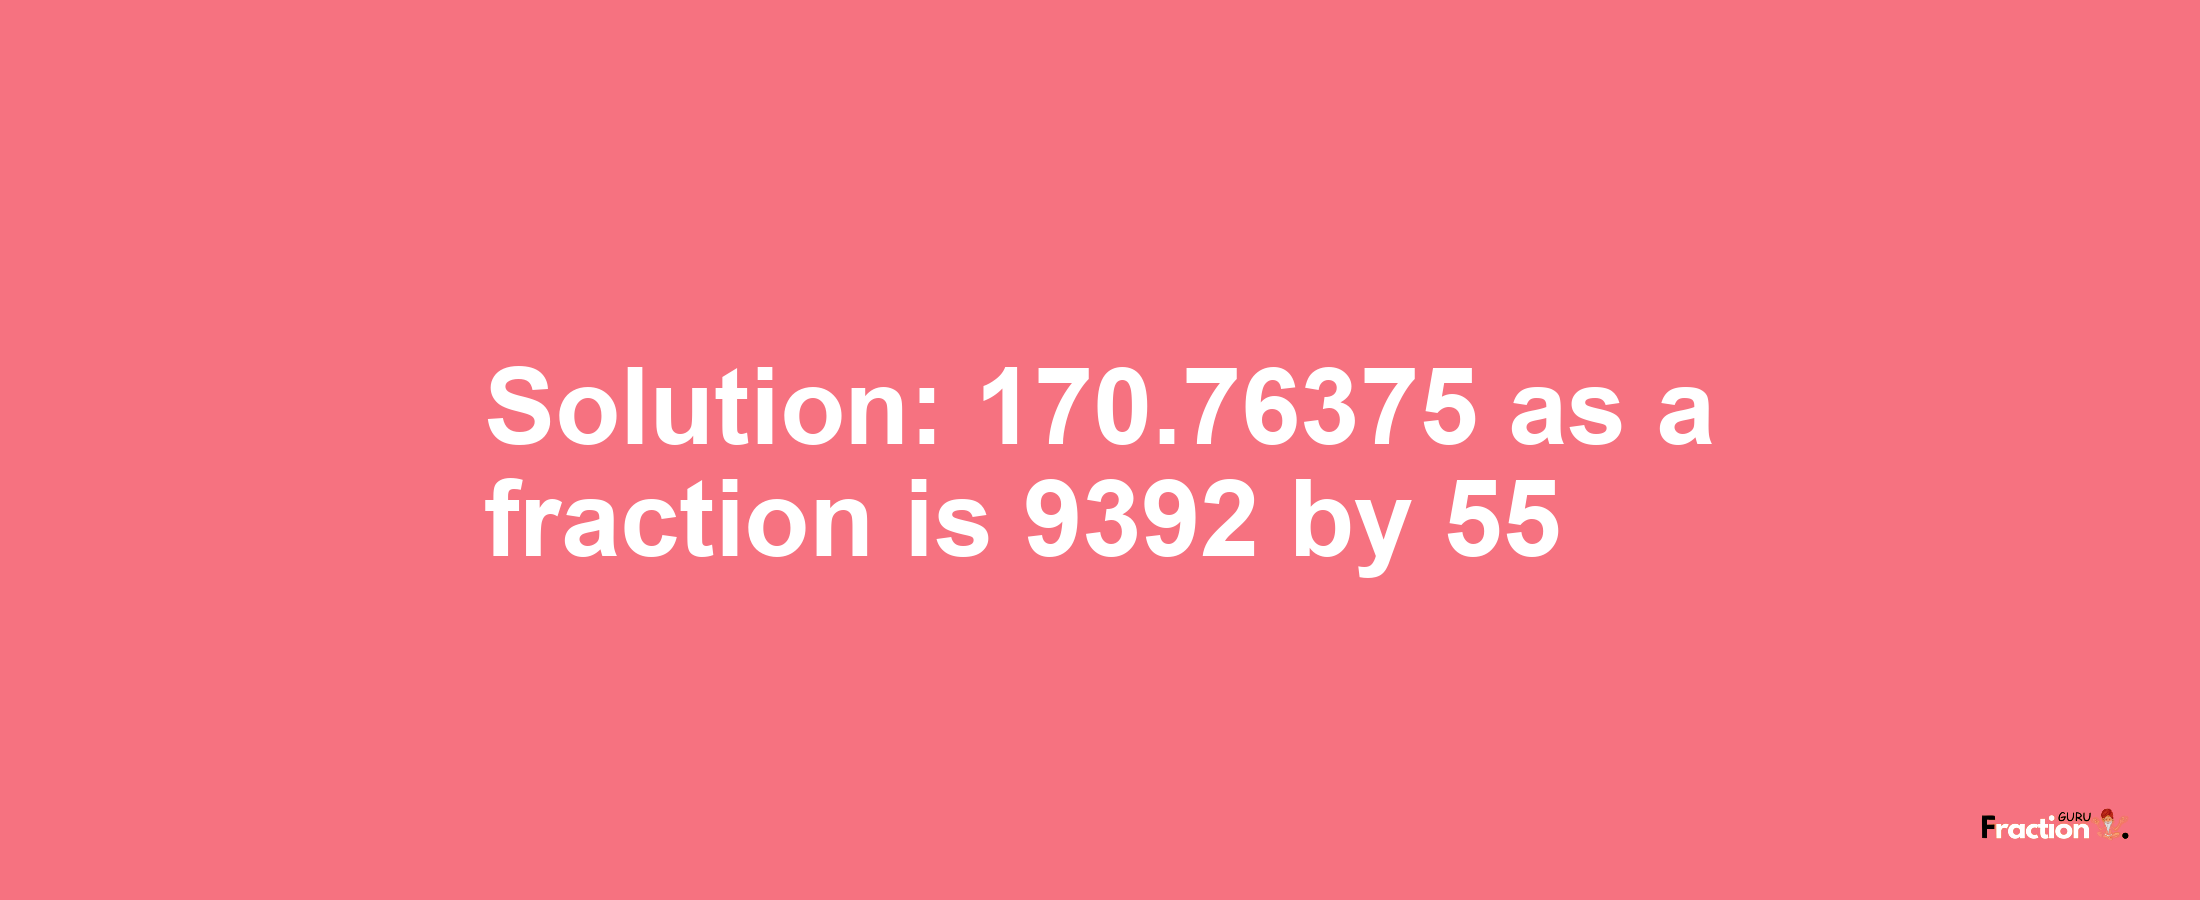 Solution:170.76375 as a fraction is 9392/55